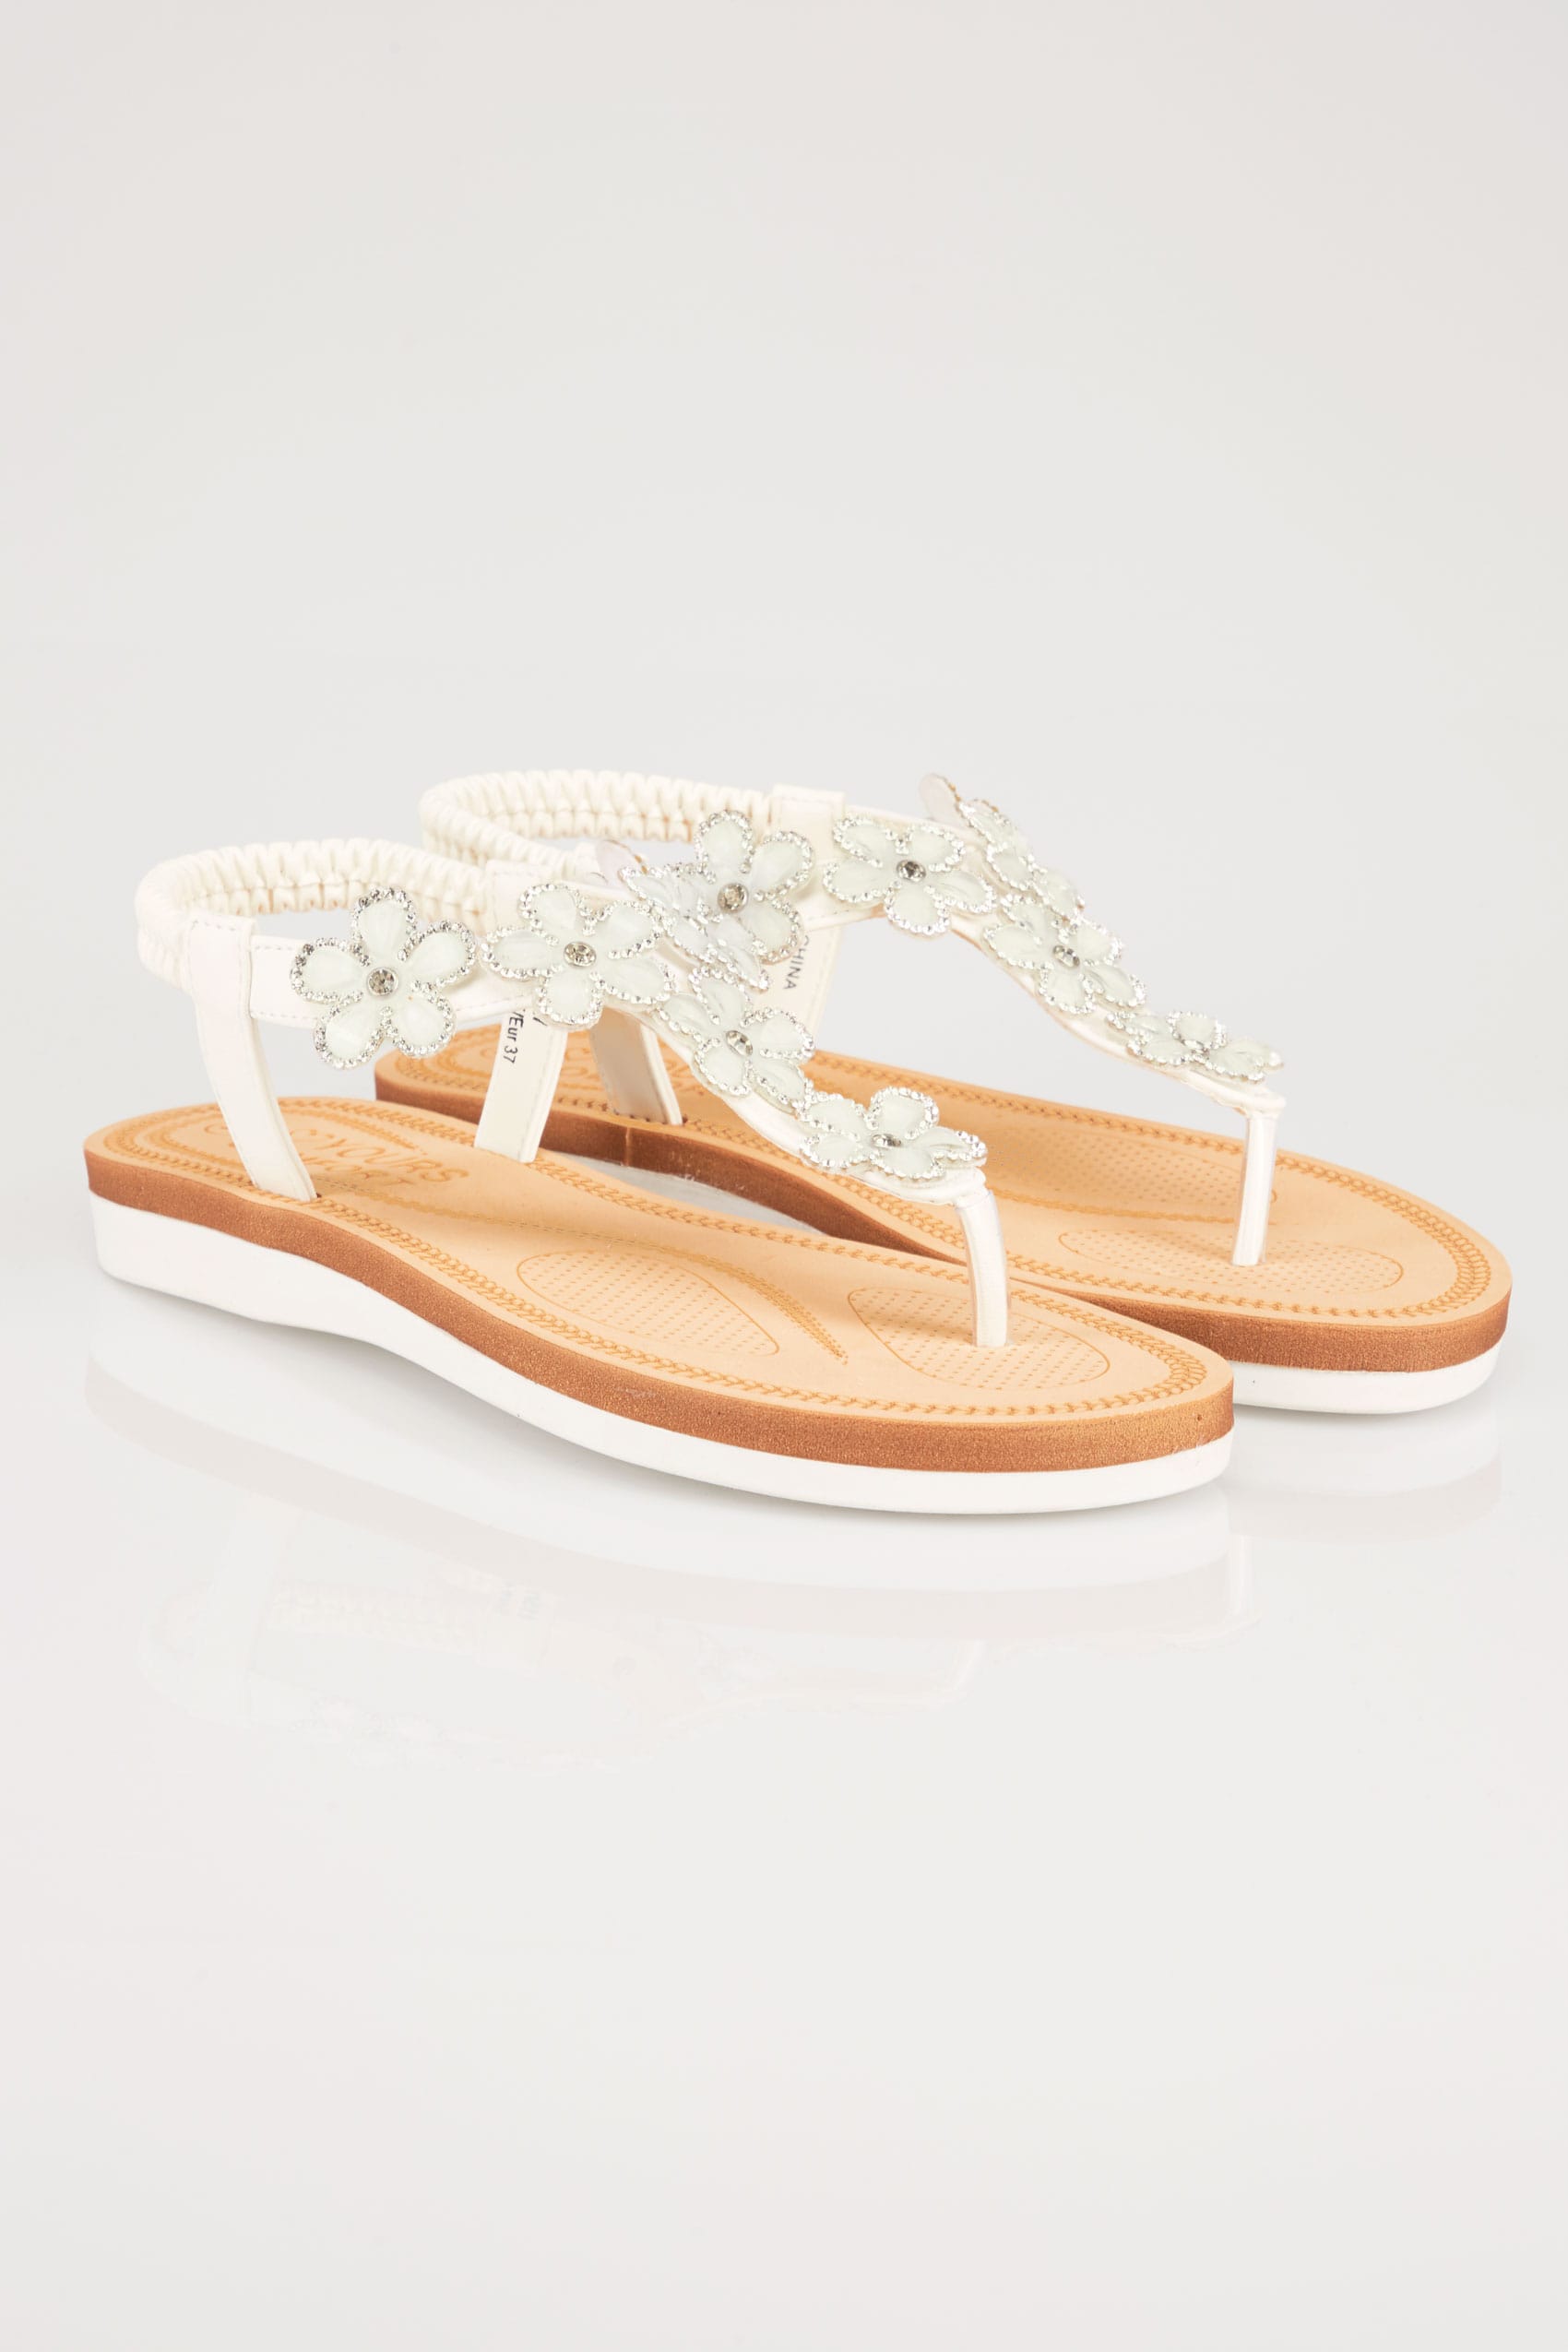 White Open Toe Sandals With Embellished Floral Straps In TRUE EEE Fit